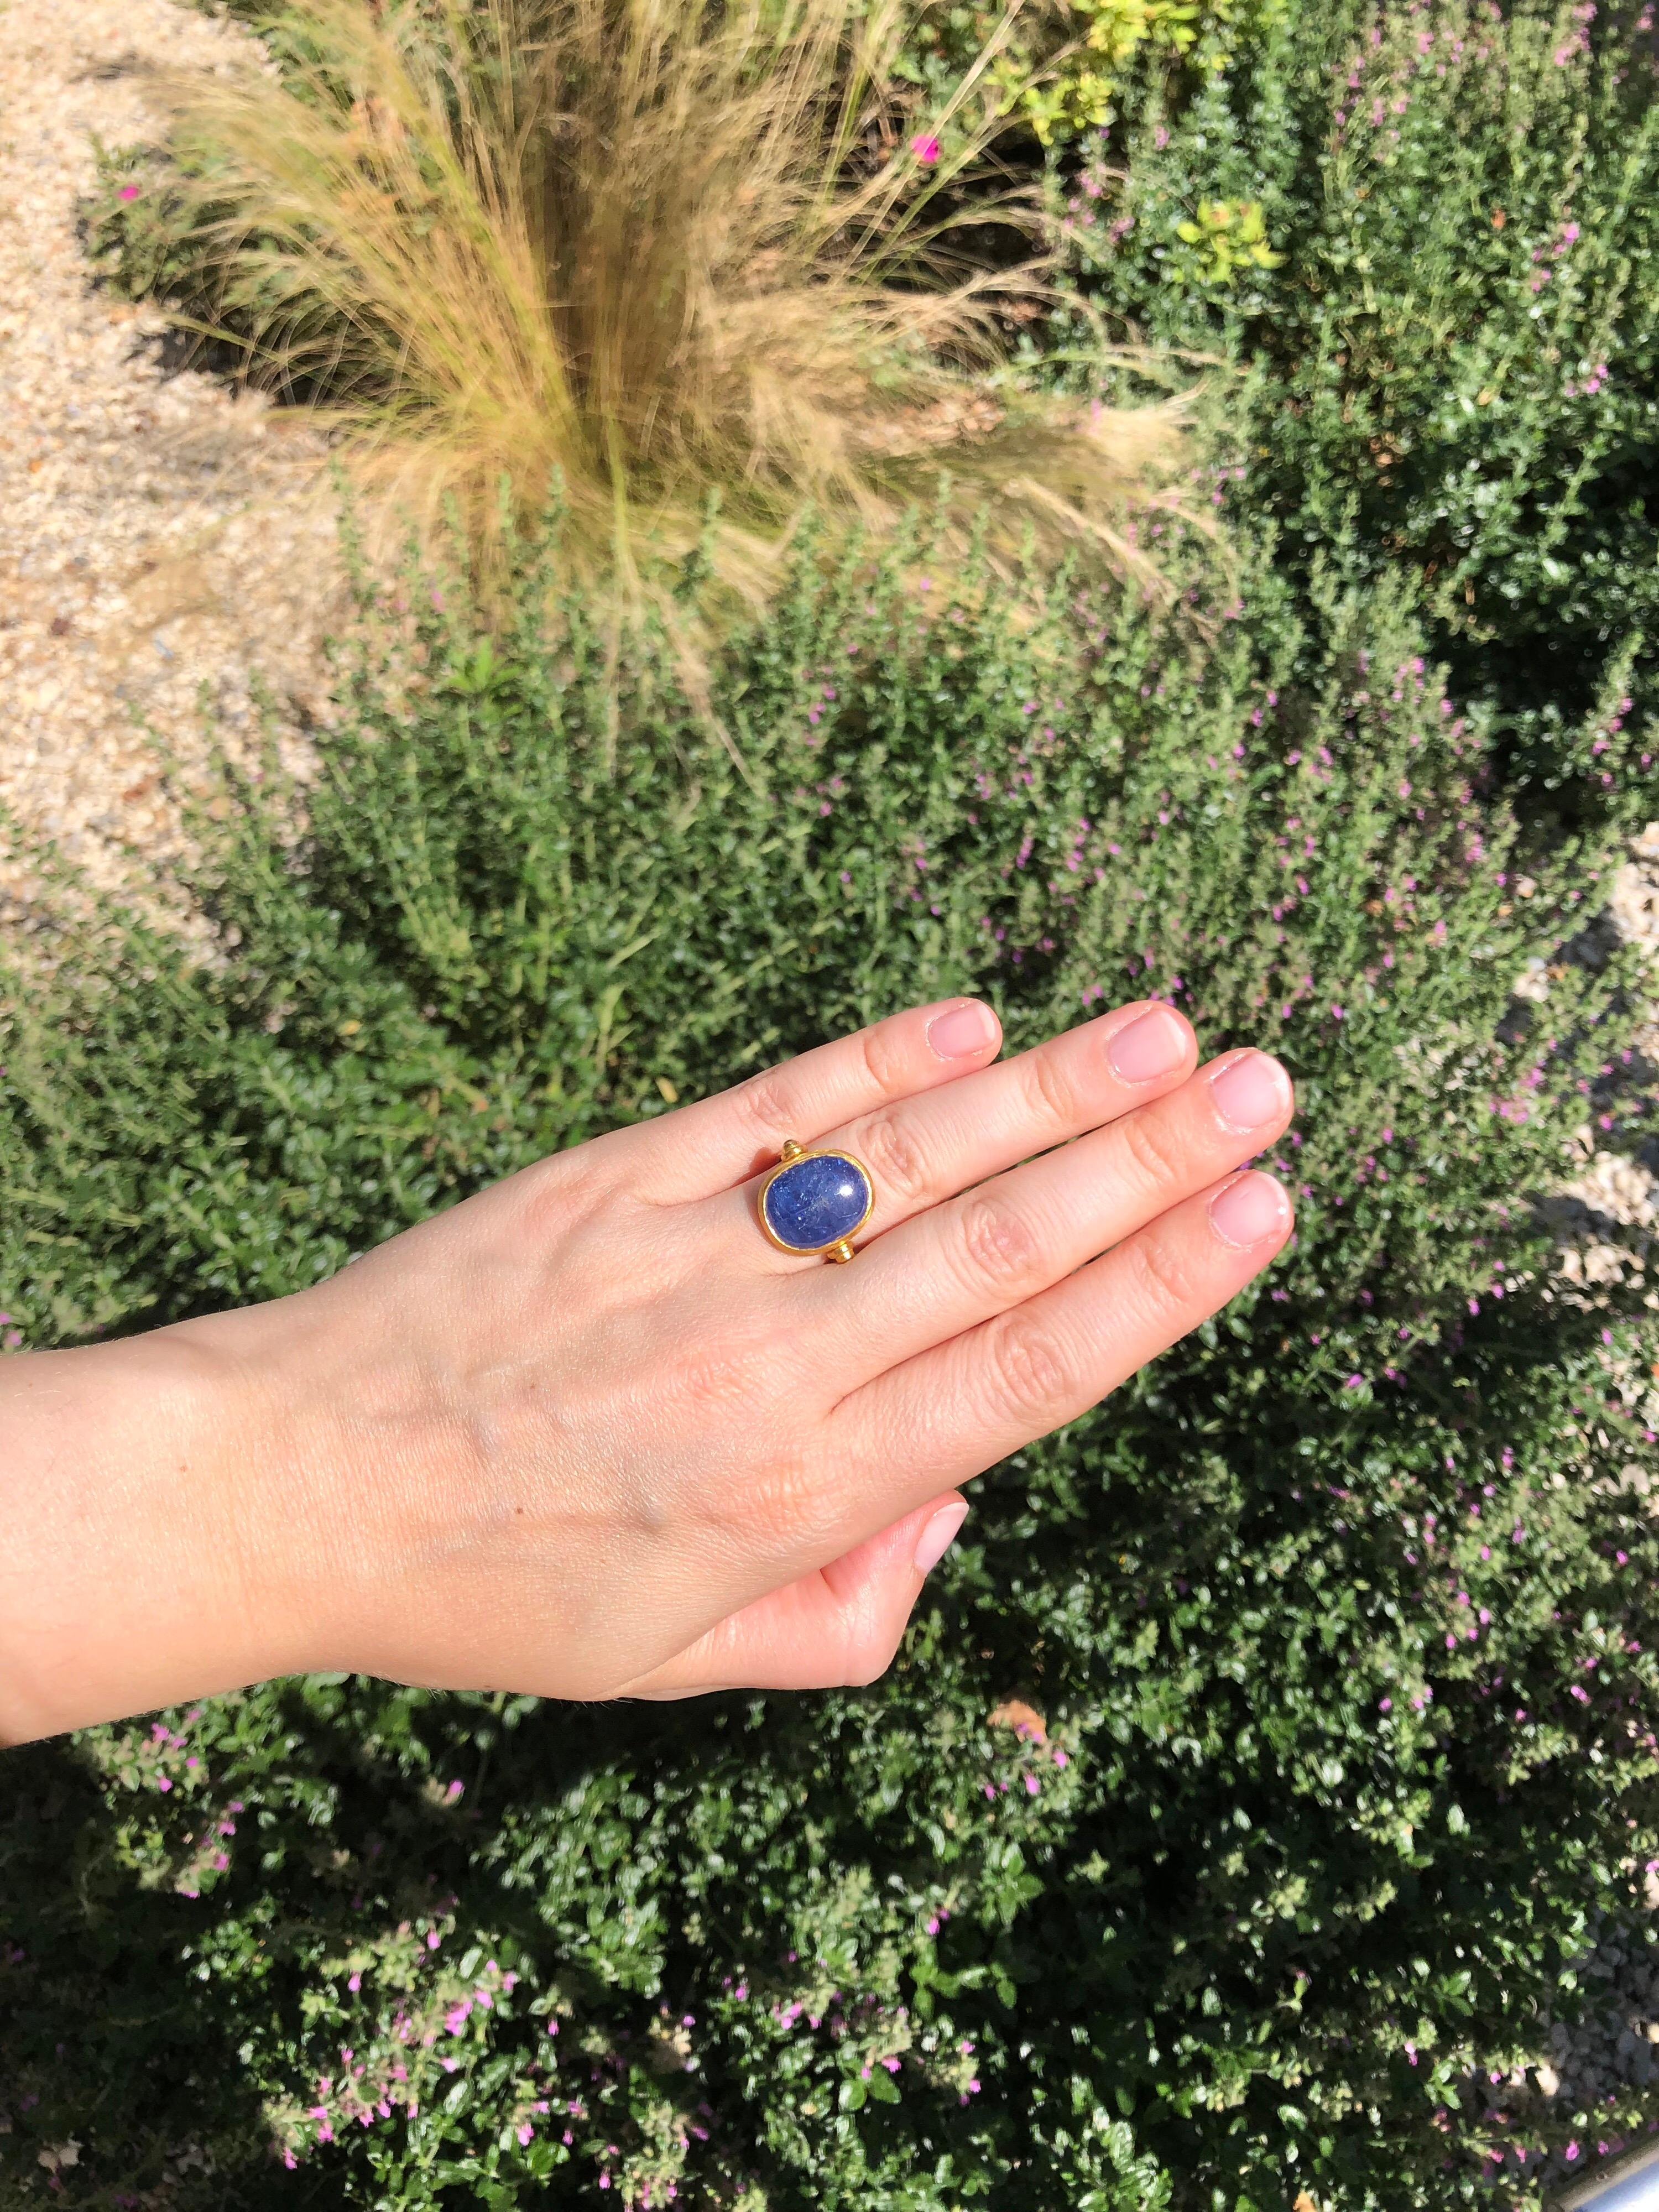 This antique style ring by Scrives is set with a deep blue natural sapphire cabochon of 15.43 cts (no treatment) and 2 small blue sapphire cabochons of 0.17cts on the side.
The central stone is slightly turning/moving in order to give more comfort.